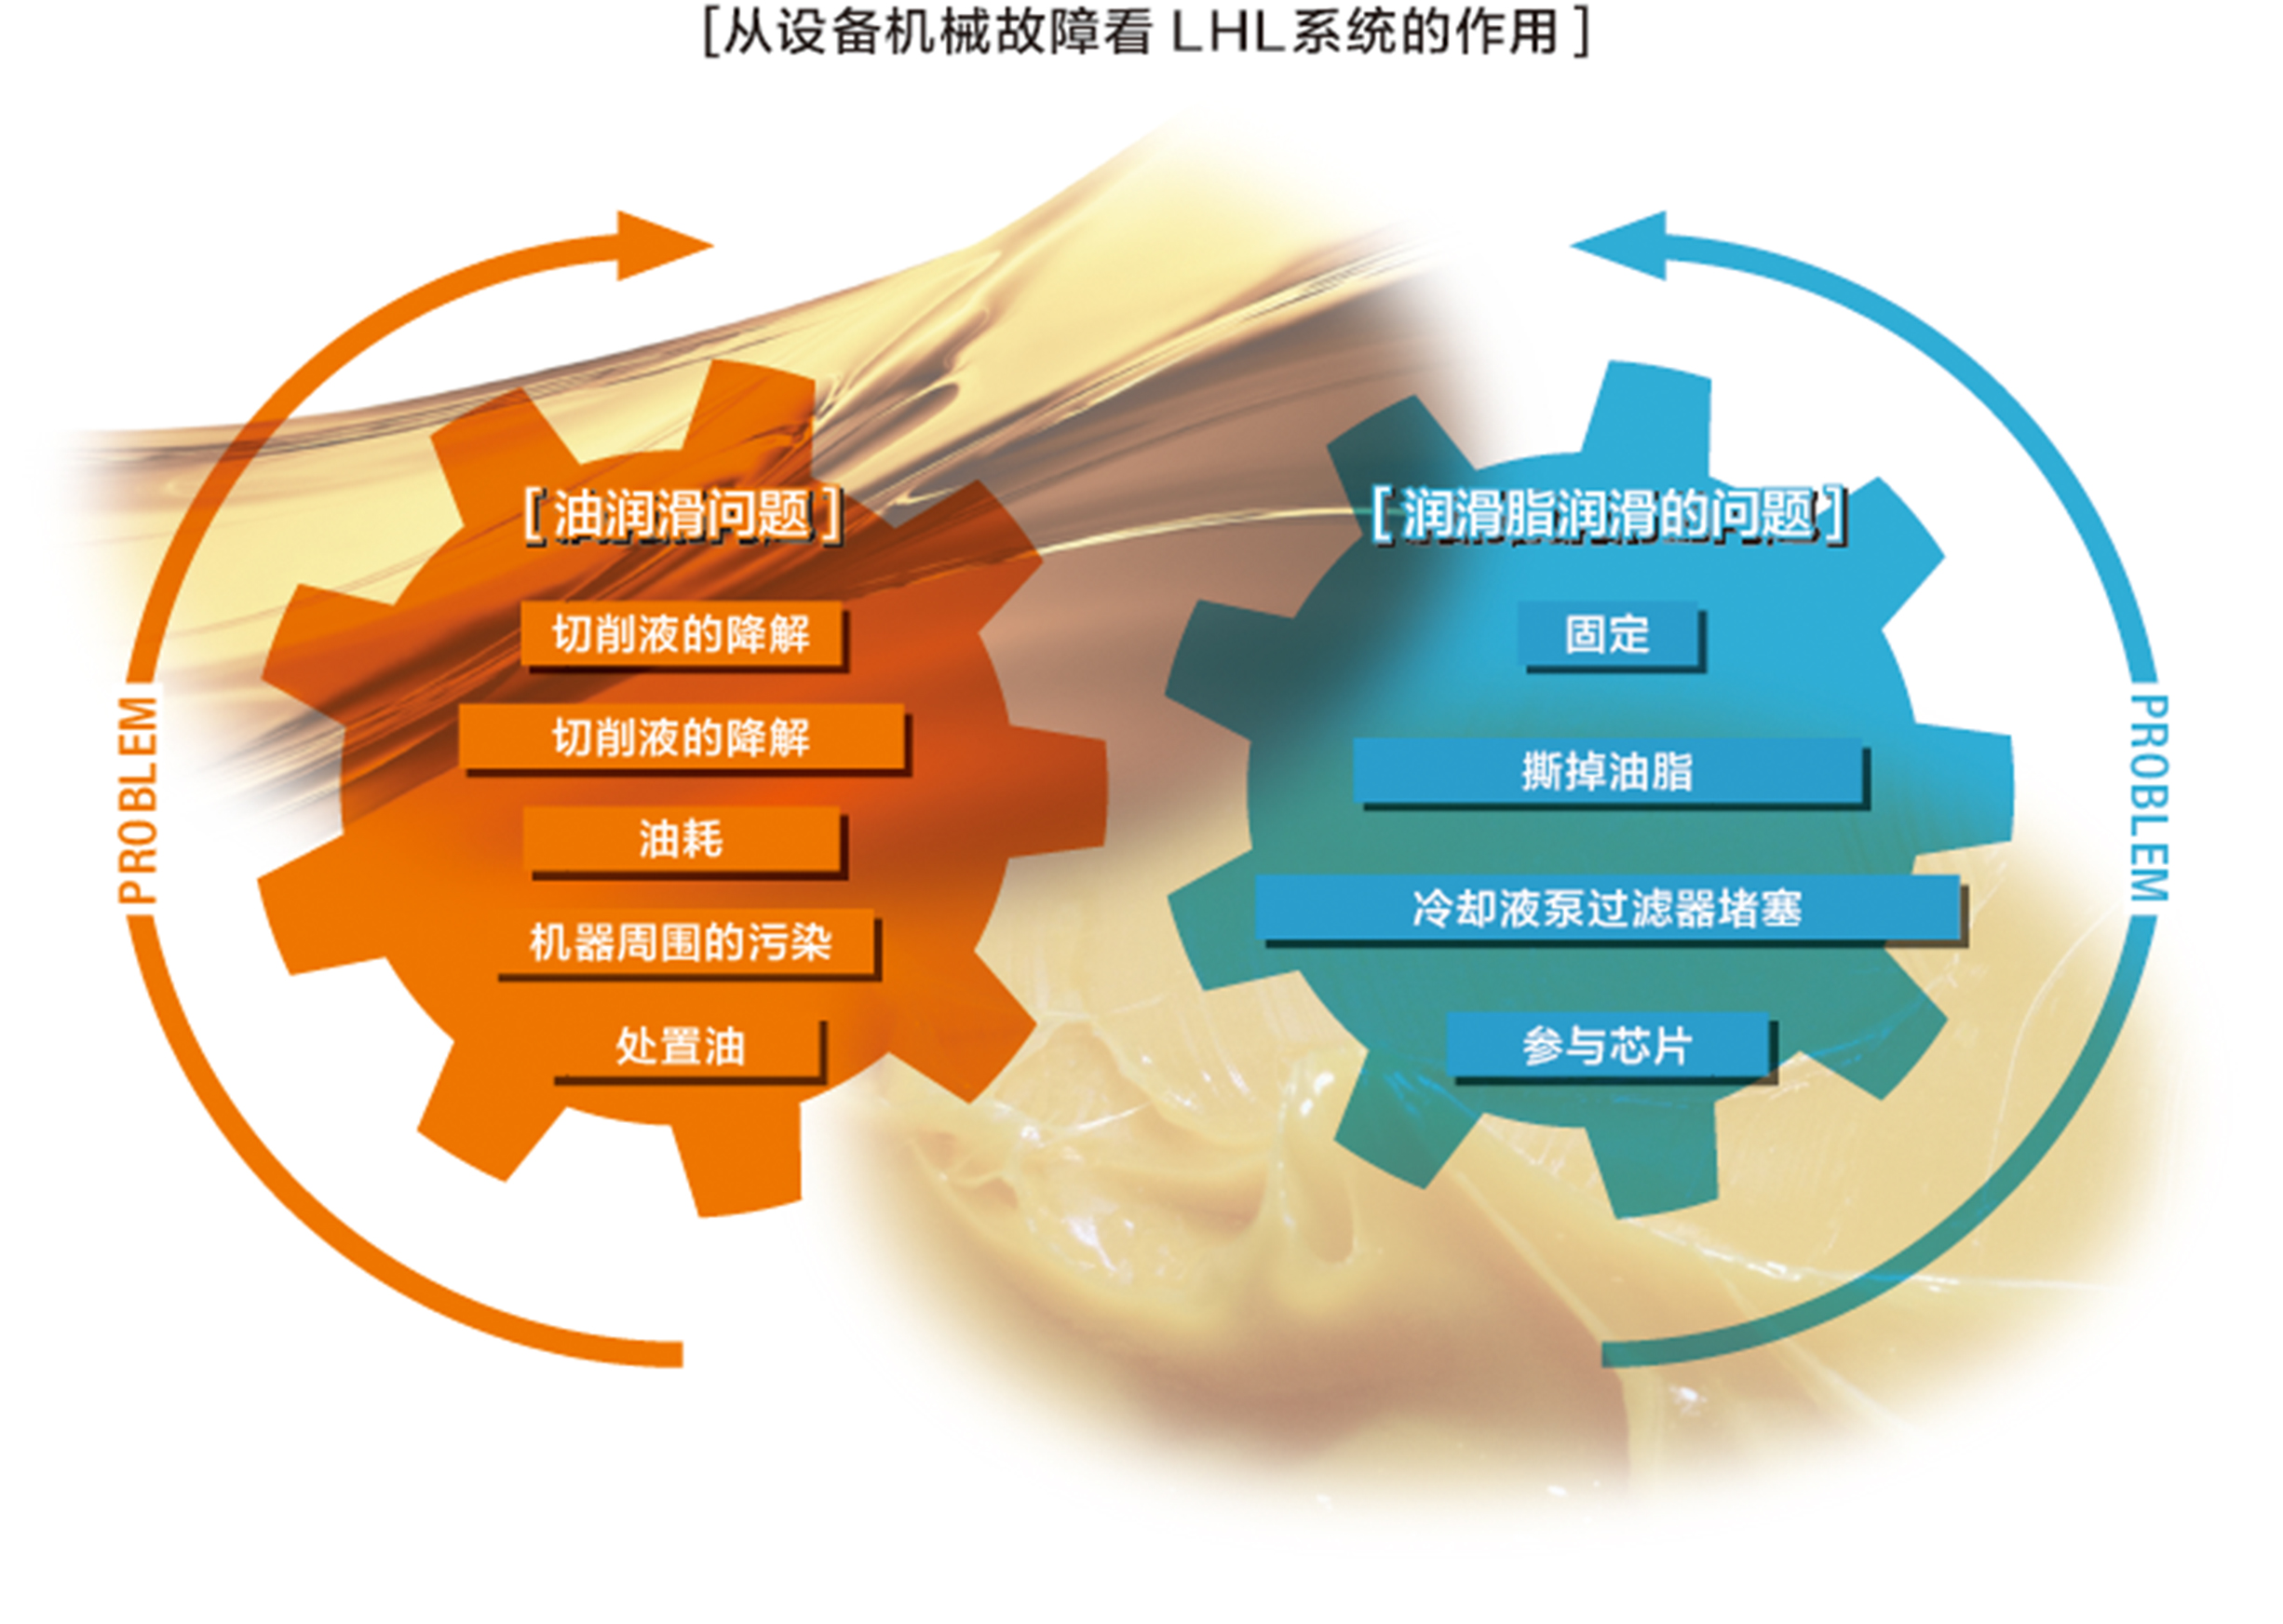 The role of the LHL system from the viewpoint of trouble of equipment machinery 